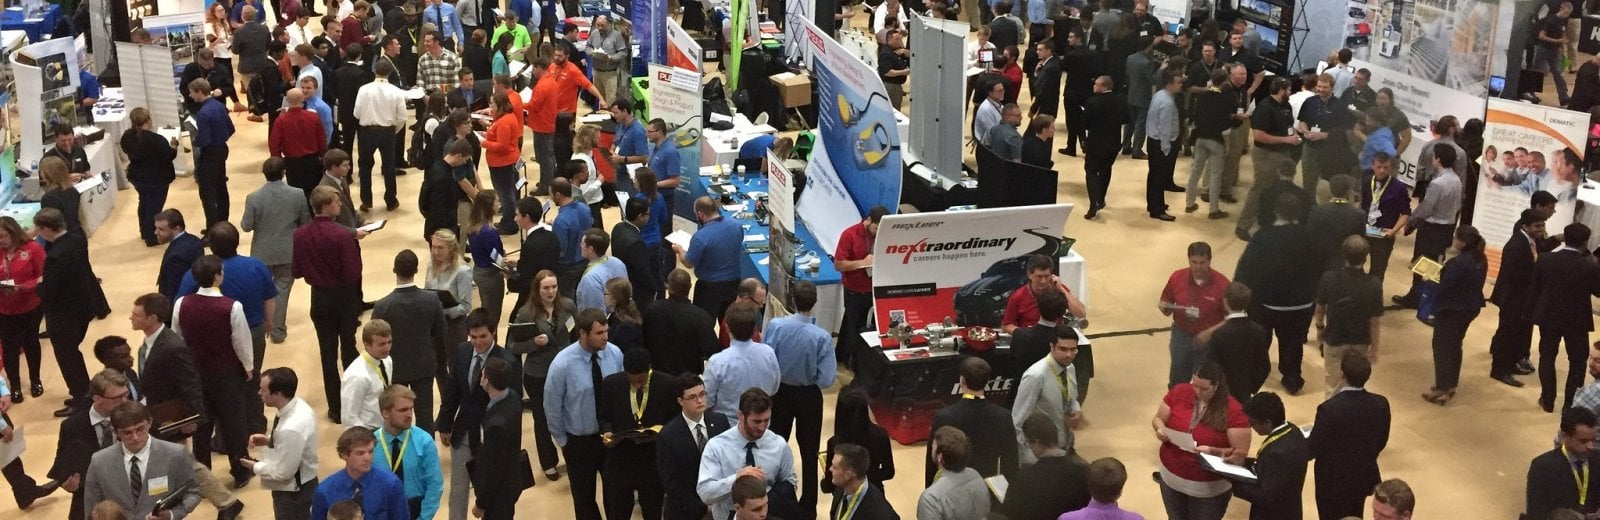 Many students gathered at the career fair